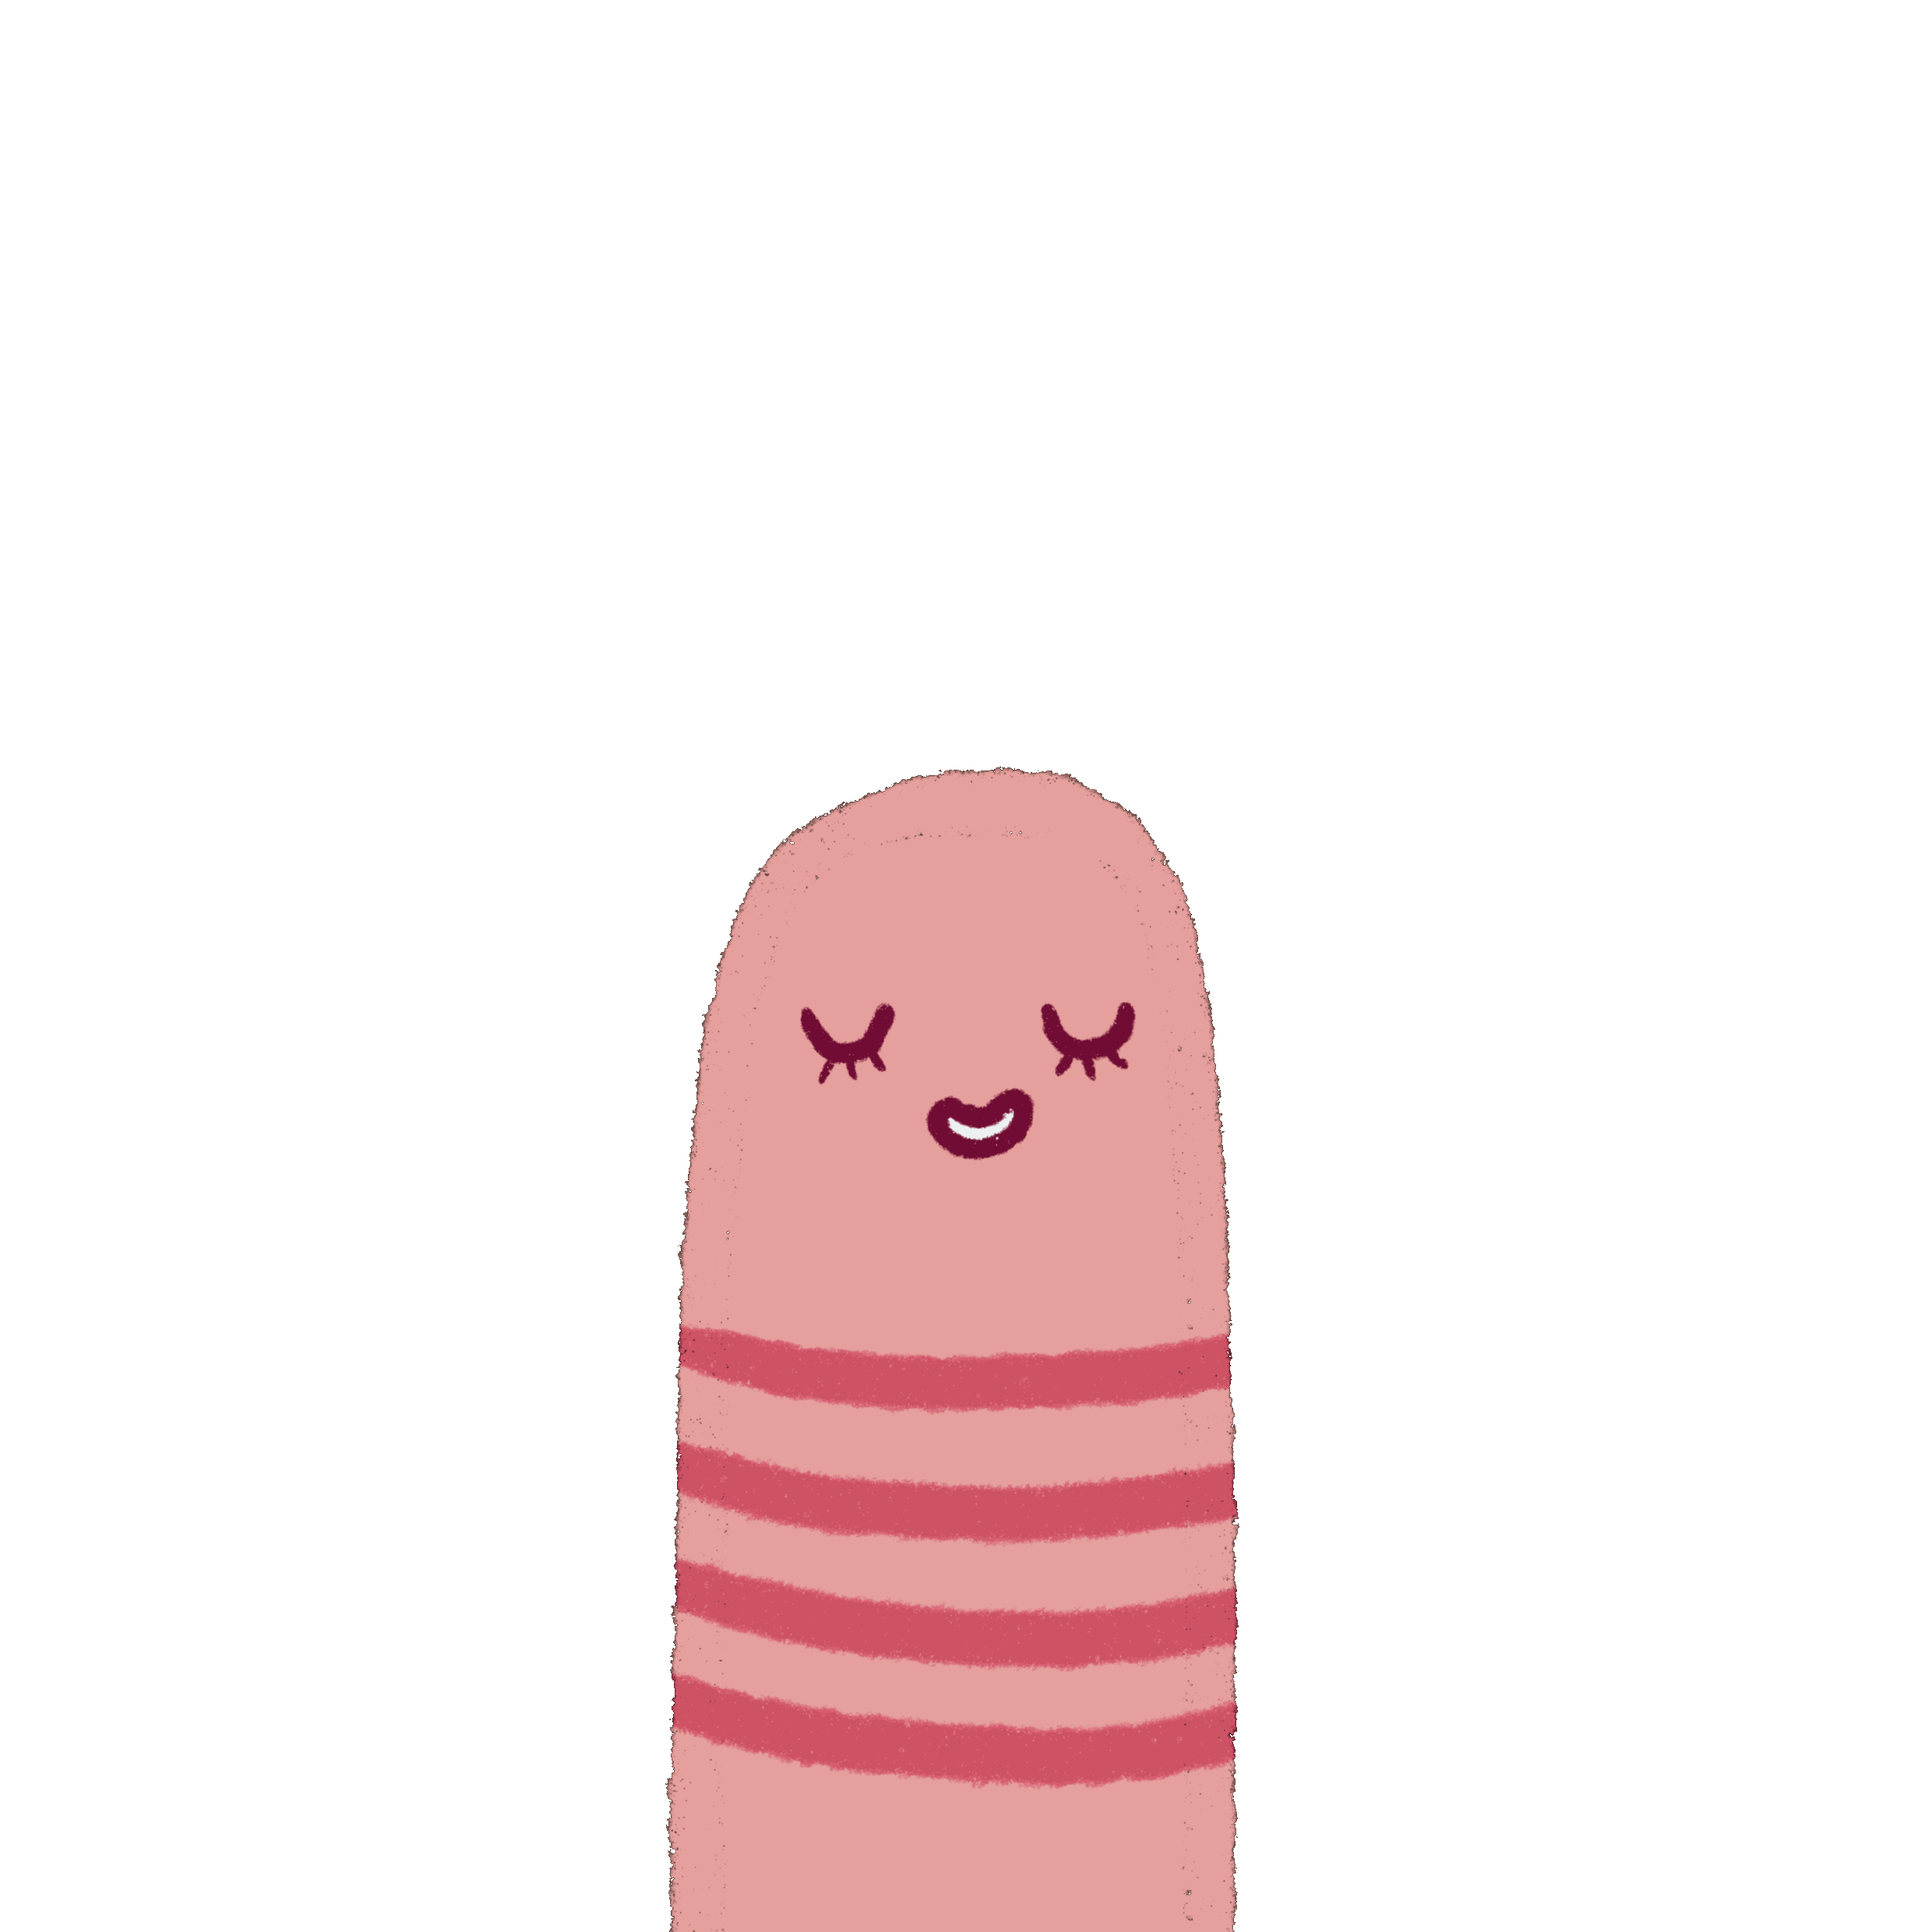 Worms gif